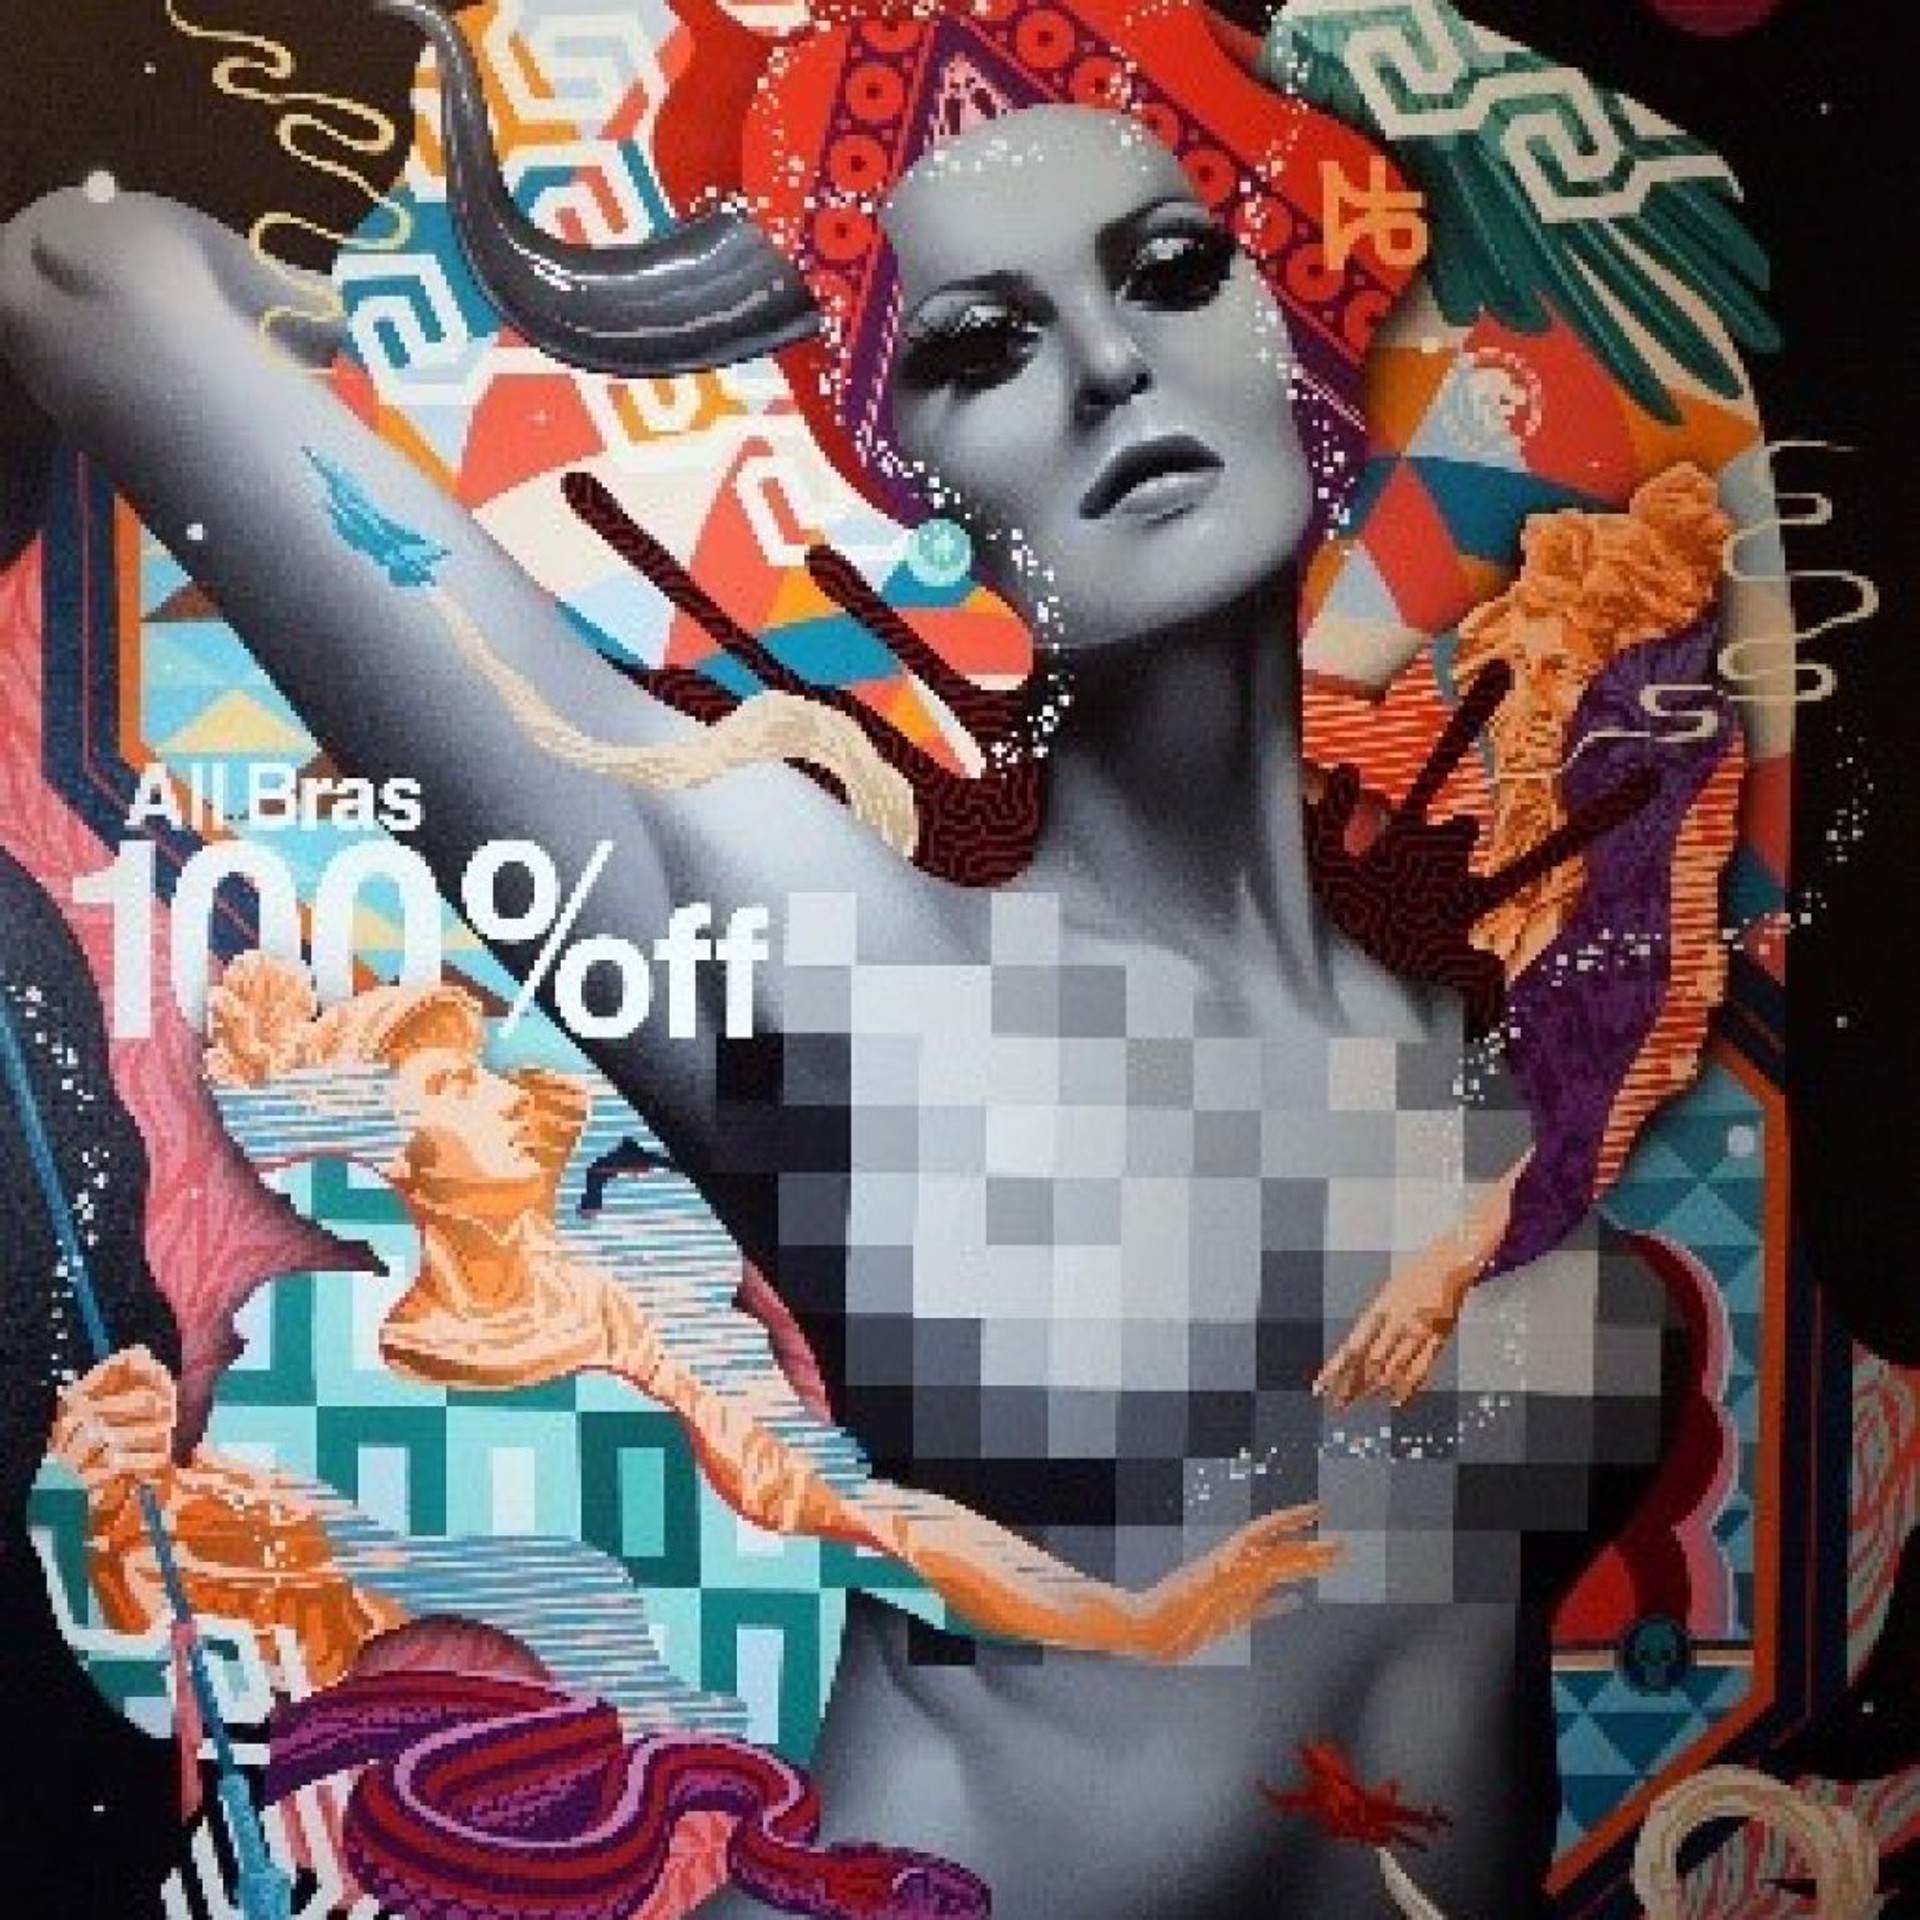 All Bras 100% Off by Tristan Eaton